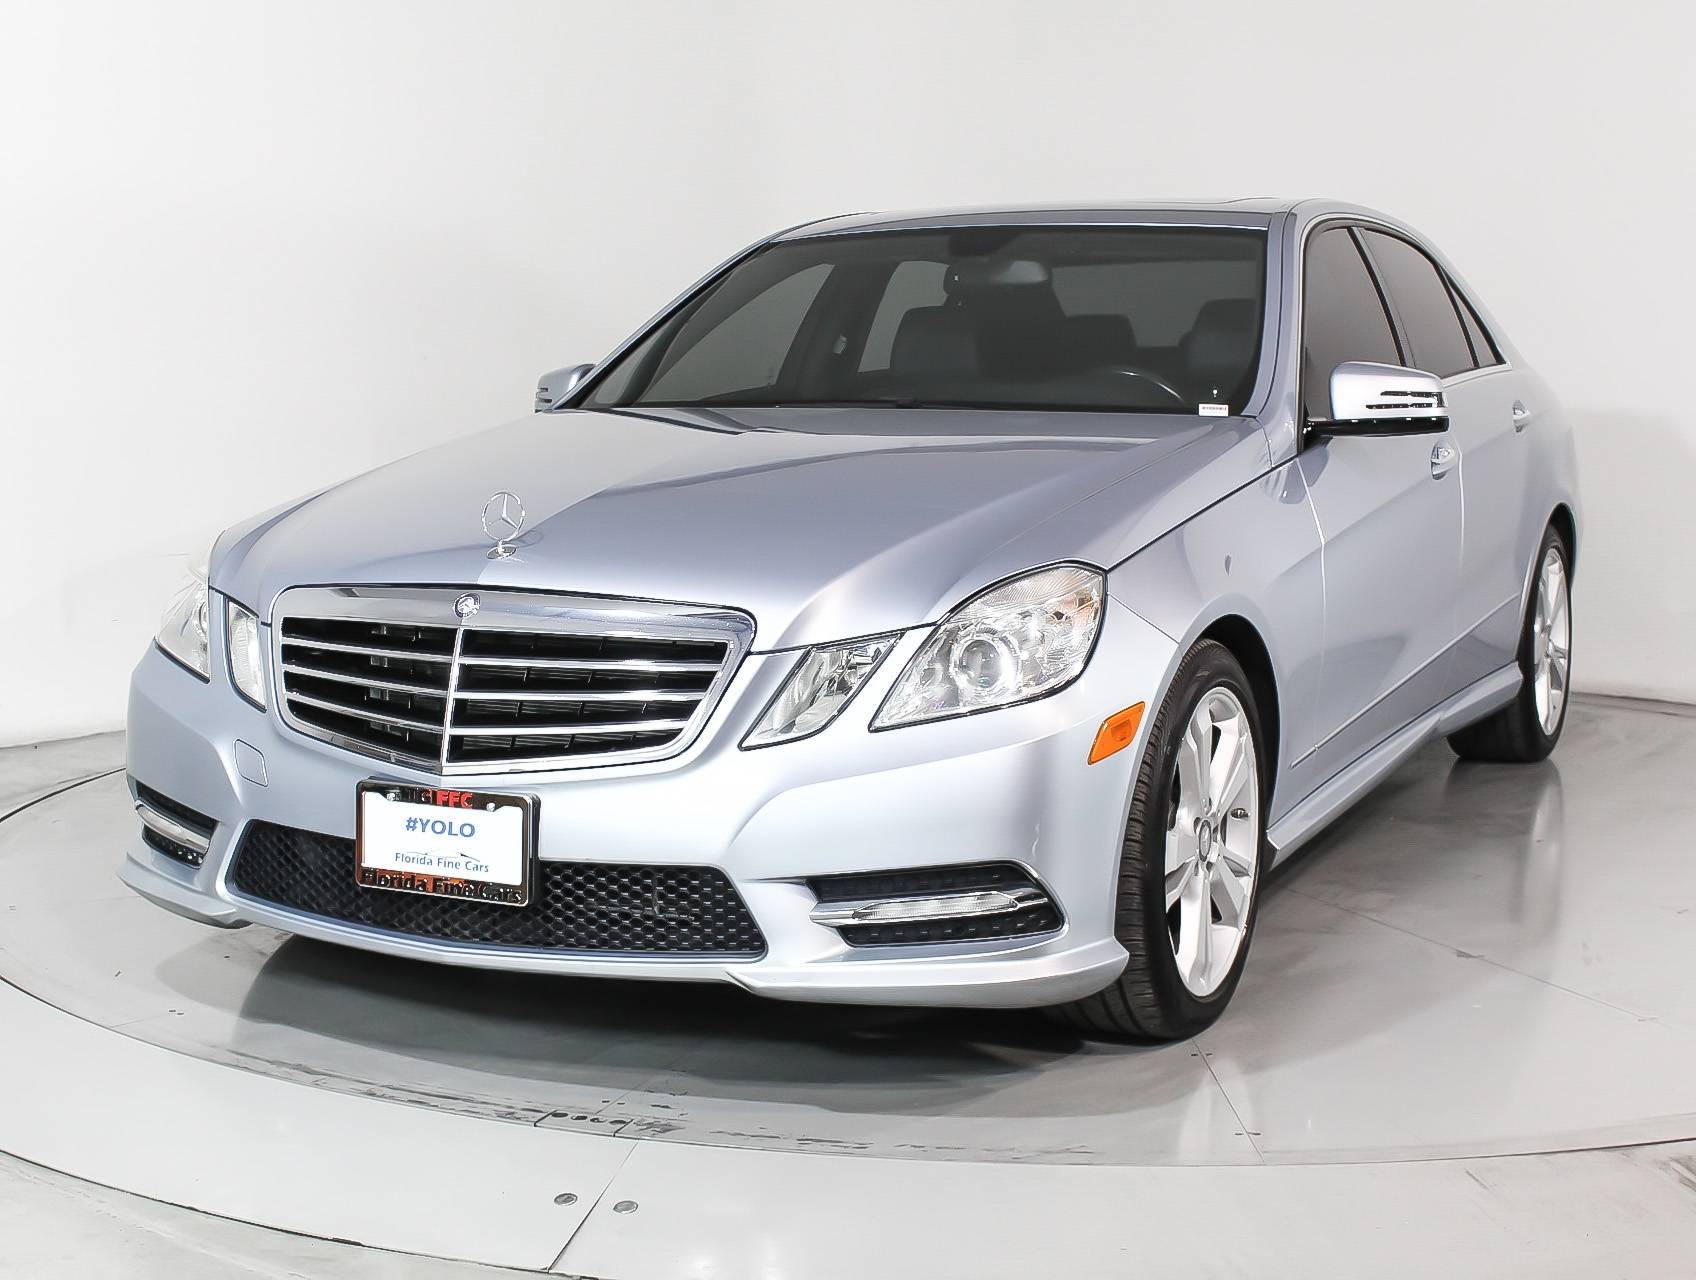 Used 13 Mercedes Benz E Class 50 4matic Sedan For Sale In Hollywood Fl Florida Fine Cars